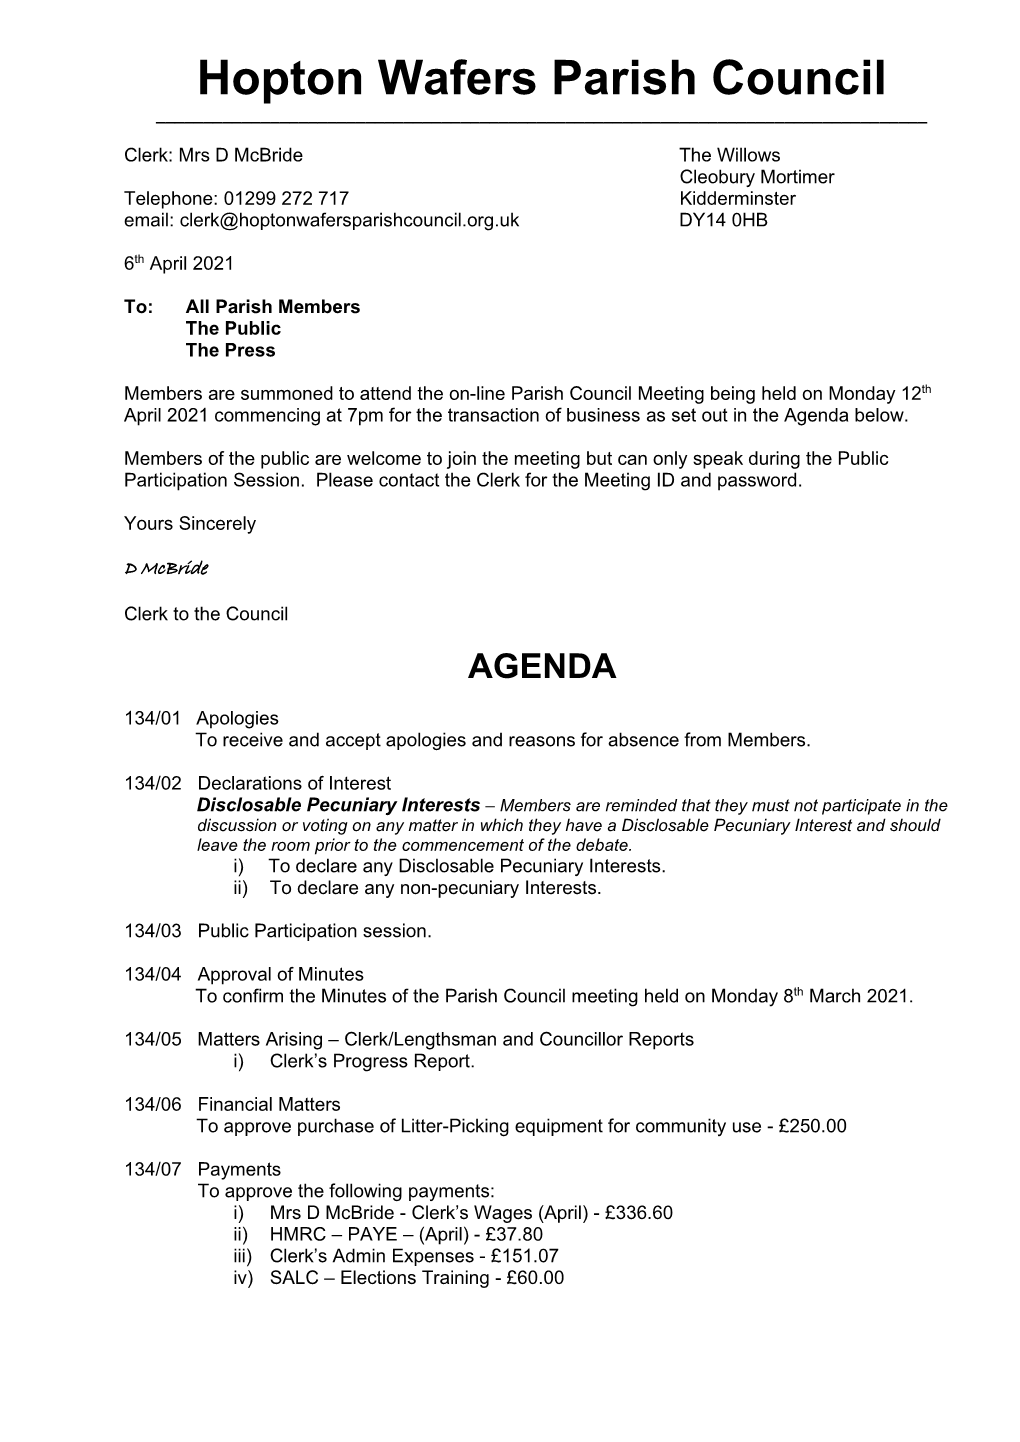 12Th April 2021 Commencing at 7Pm for the Transaction of Business As Set out in the Agenda Below